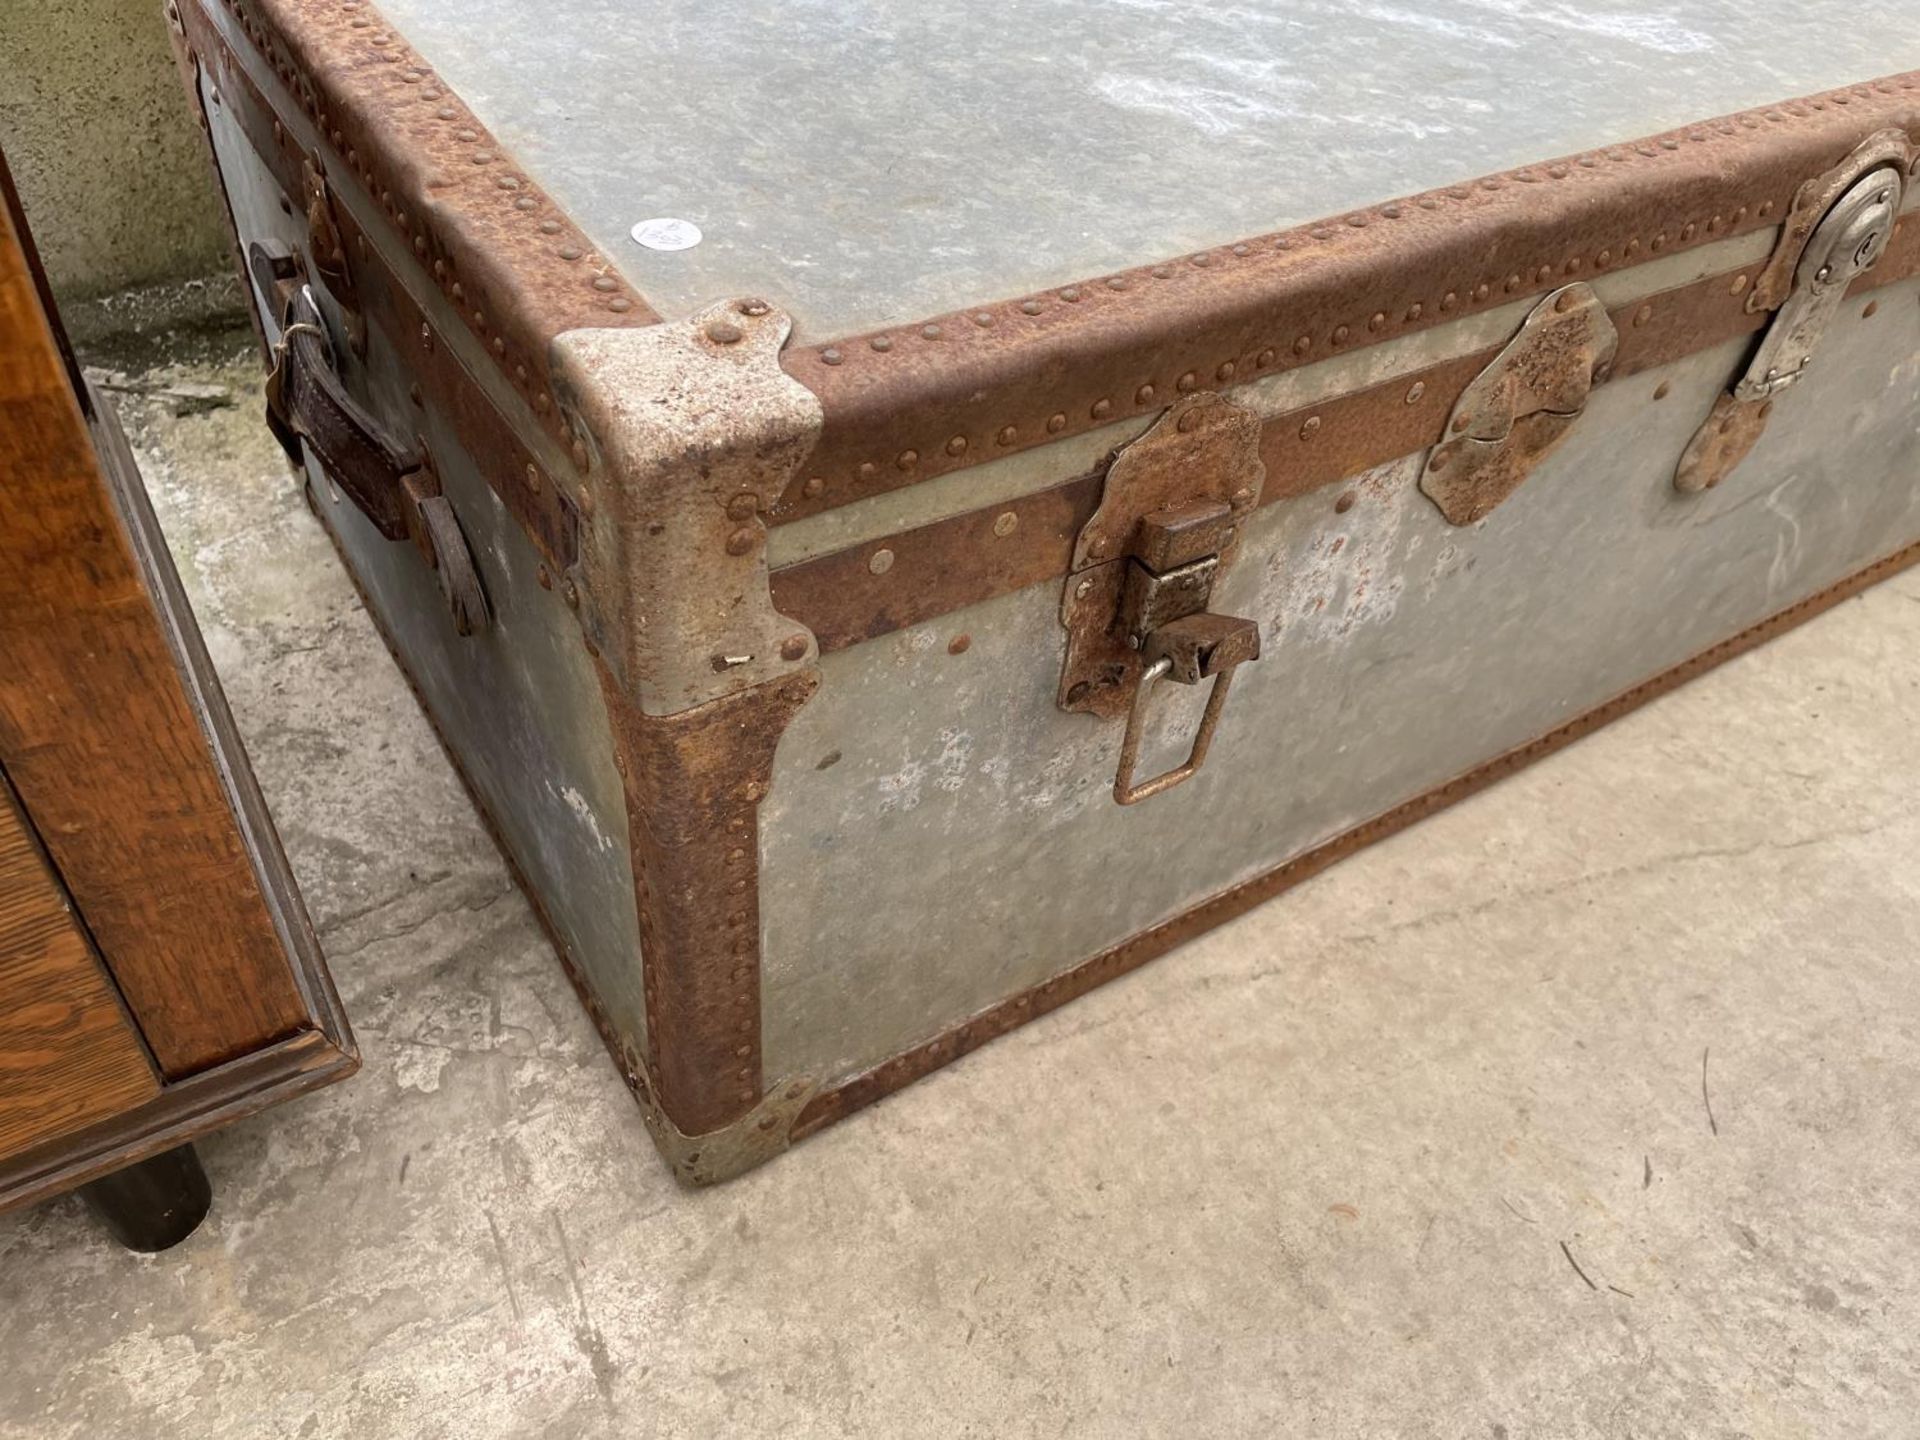 A SUBSTANTIAL GALVANISED METAL TRAVELLING TRUNK, 40X21" - Image 3 of 4